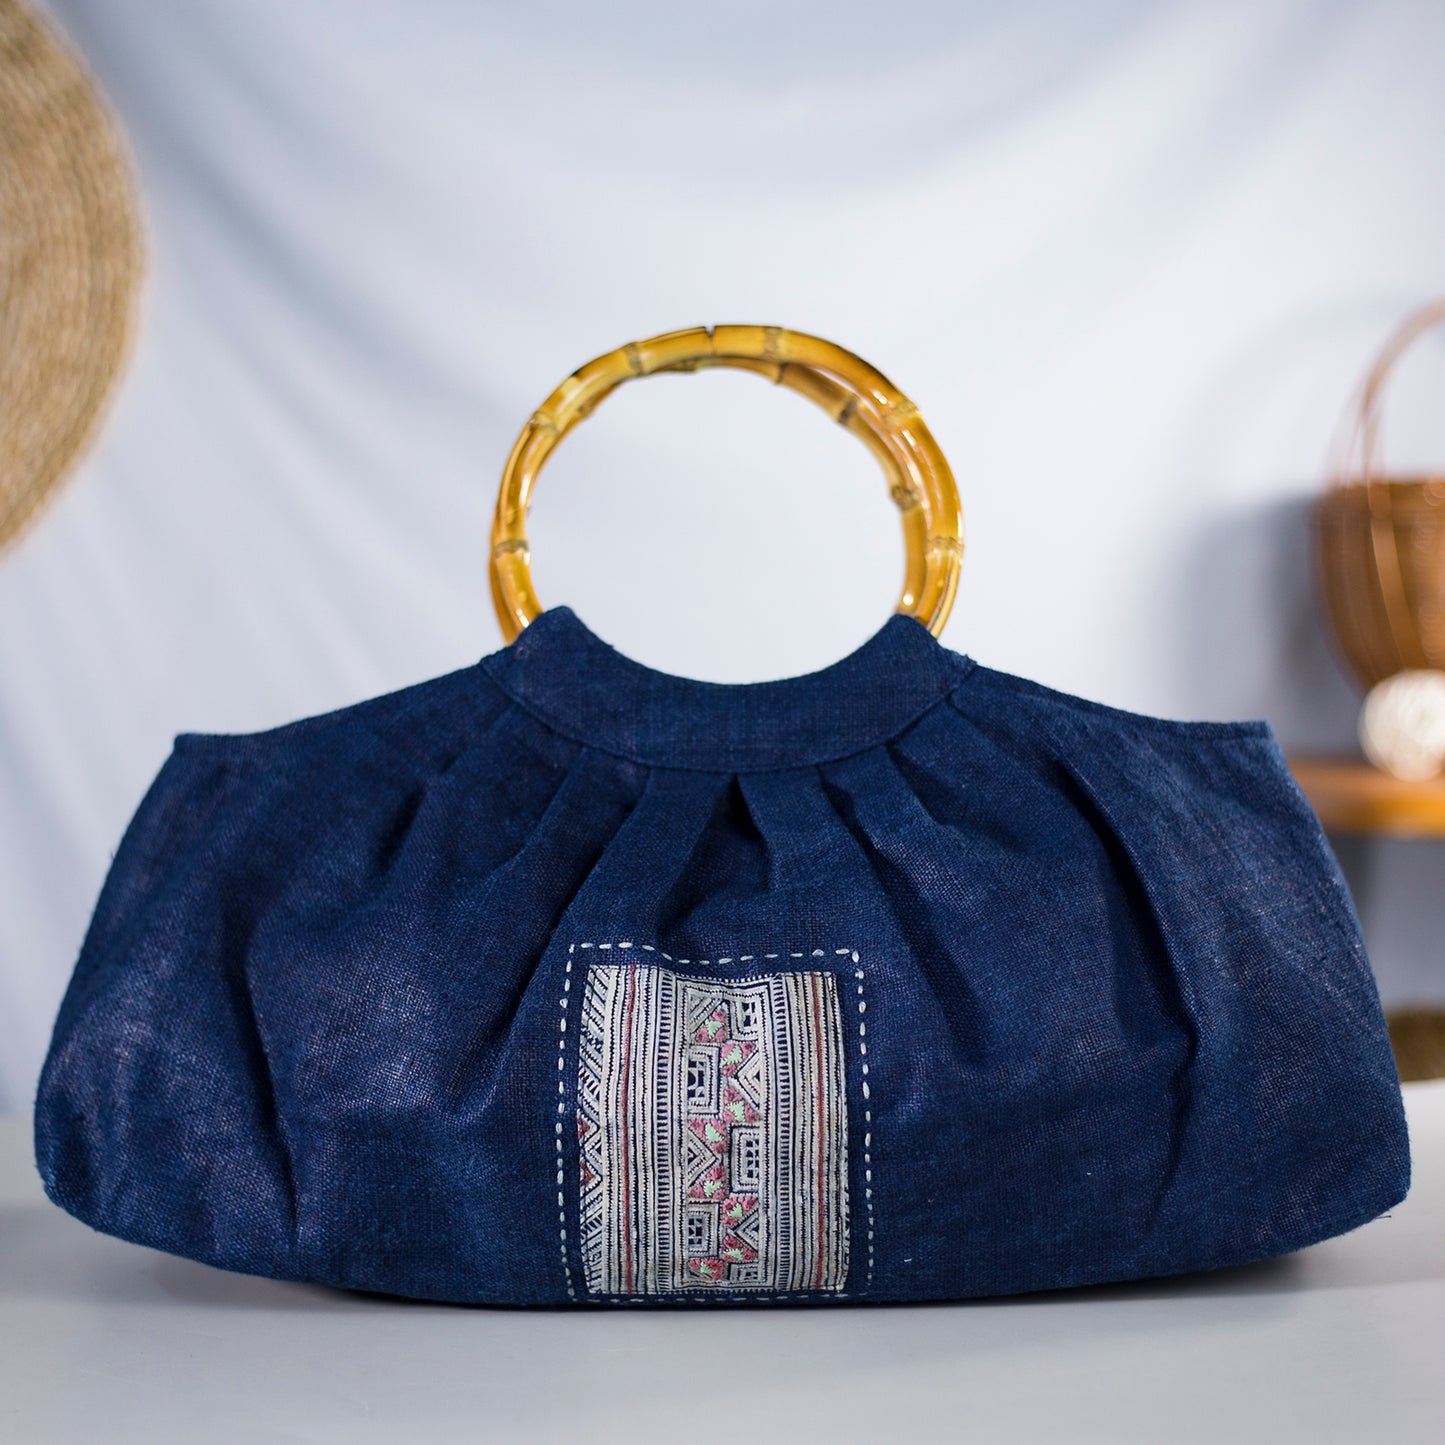 Bamboo handle bag, natural hemp in INDIGO BLUE with vintage patch